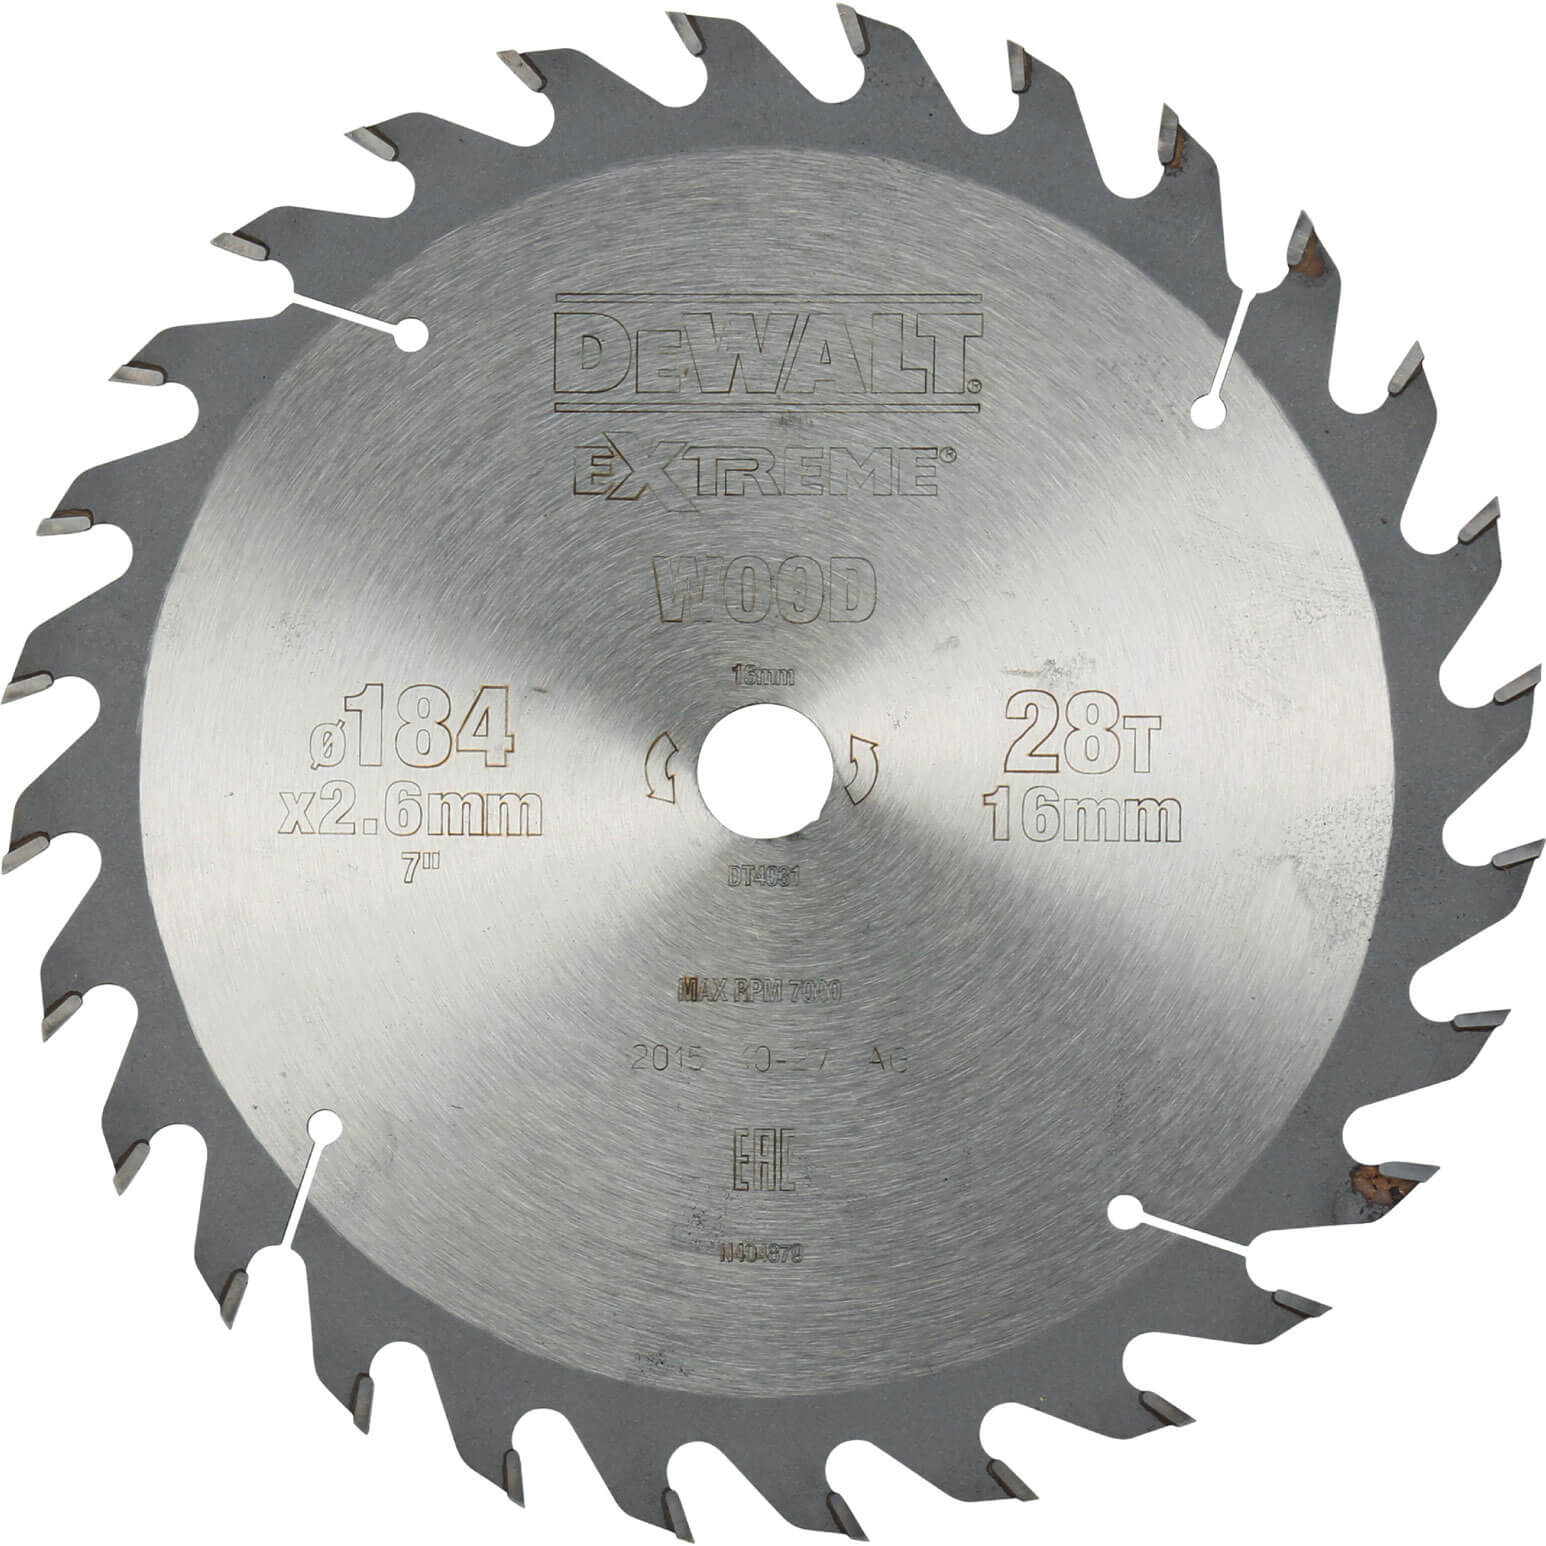 Photos - Power Tool Accessory DeWALT Extreme General Purpose Saw Blades 165mm 24T 20mm DT4026 